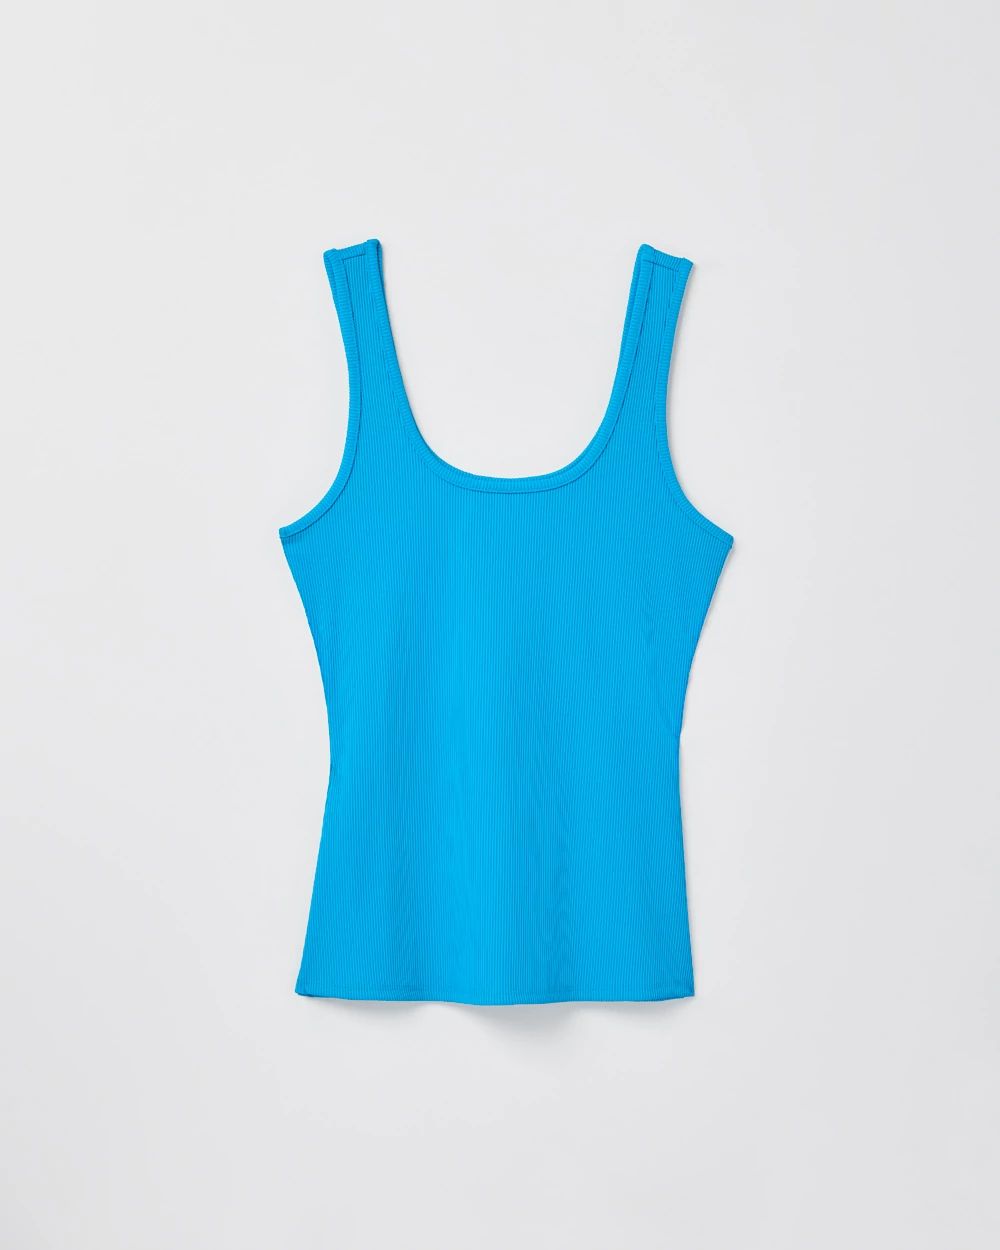 WHBM® FORME Rib Scoop Tank click to view larger image.